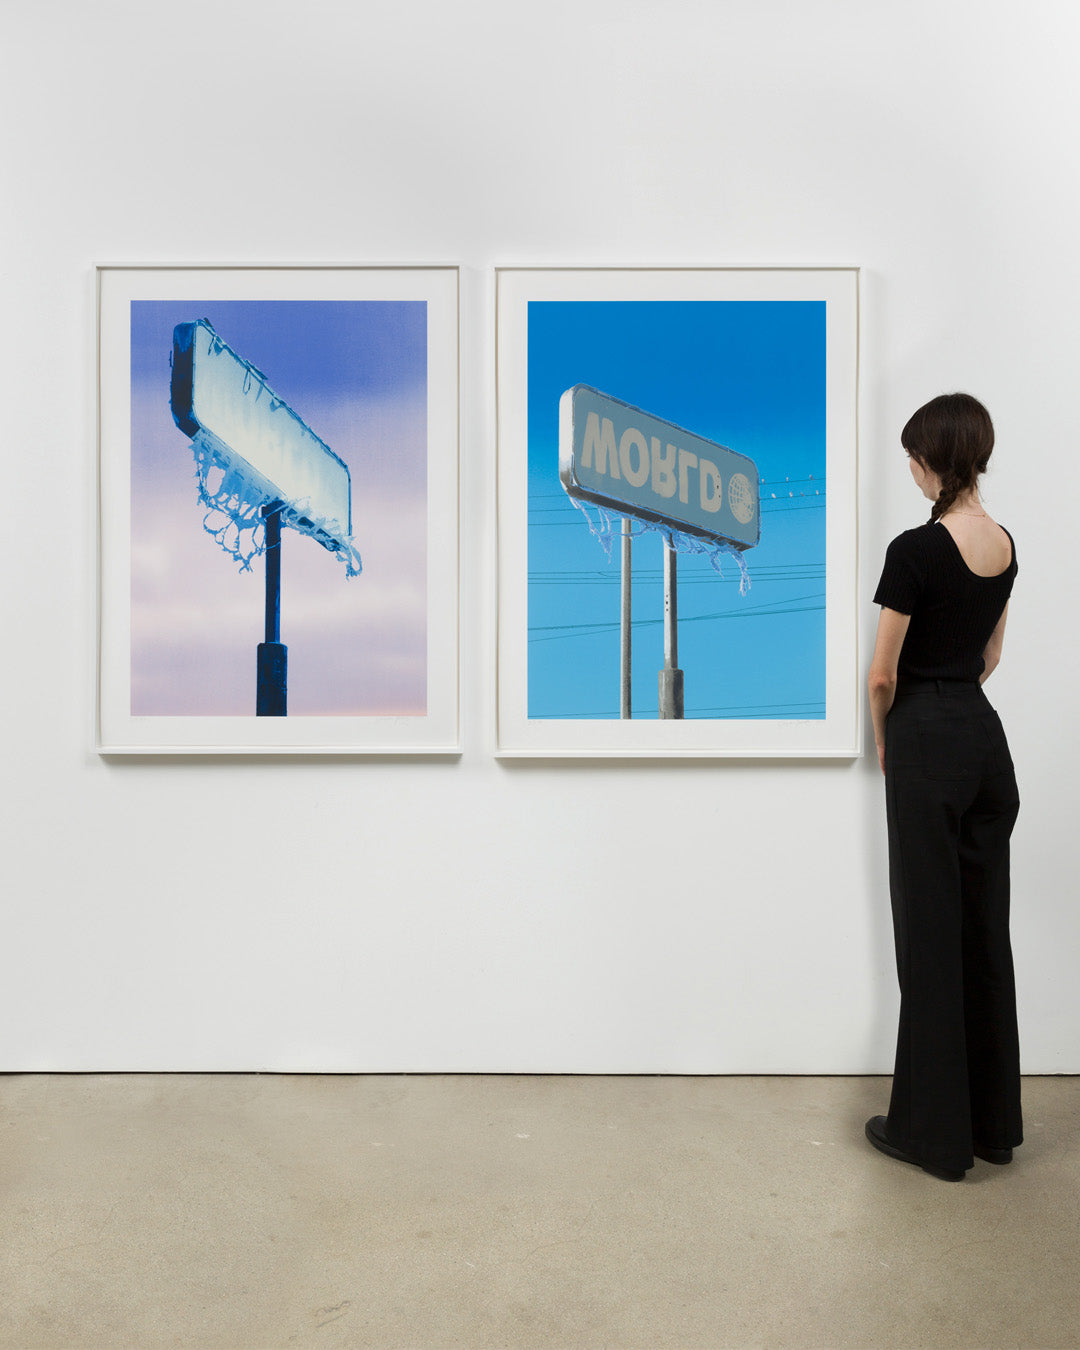 Both print editions by Sayre Gomez, World 1 and World 2, framed and hung in gallery wall with a person next to them to show scale. Installation view.